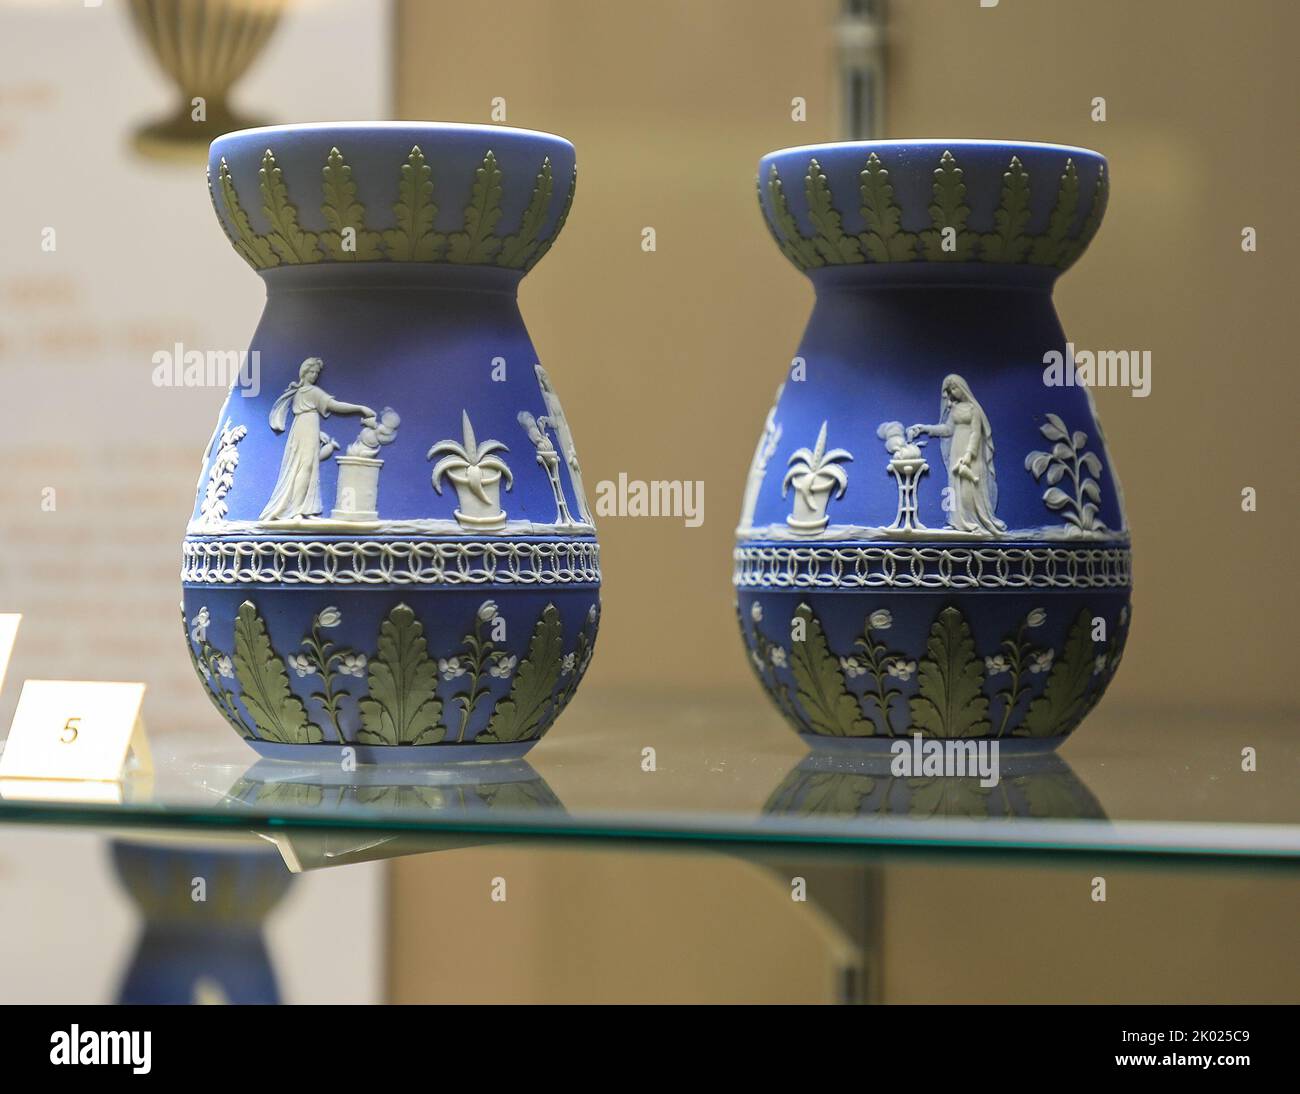 Two Jasper ware vases by potter William Adams of Tunstall on display, Potteries Museum and Art Gallery, Hanley, Stoke-on-Trent, Staffs, England, UK Stock Photo